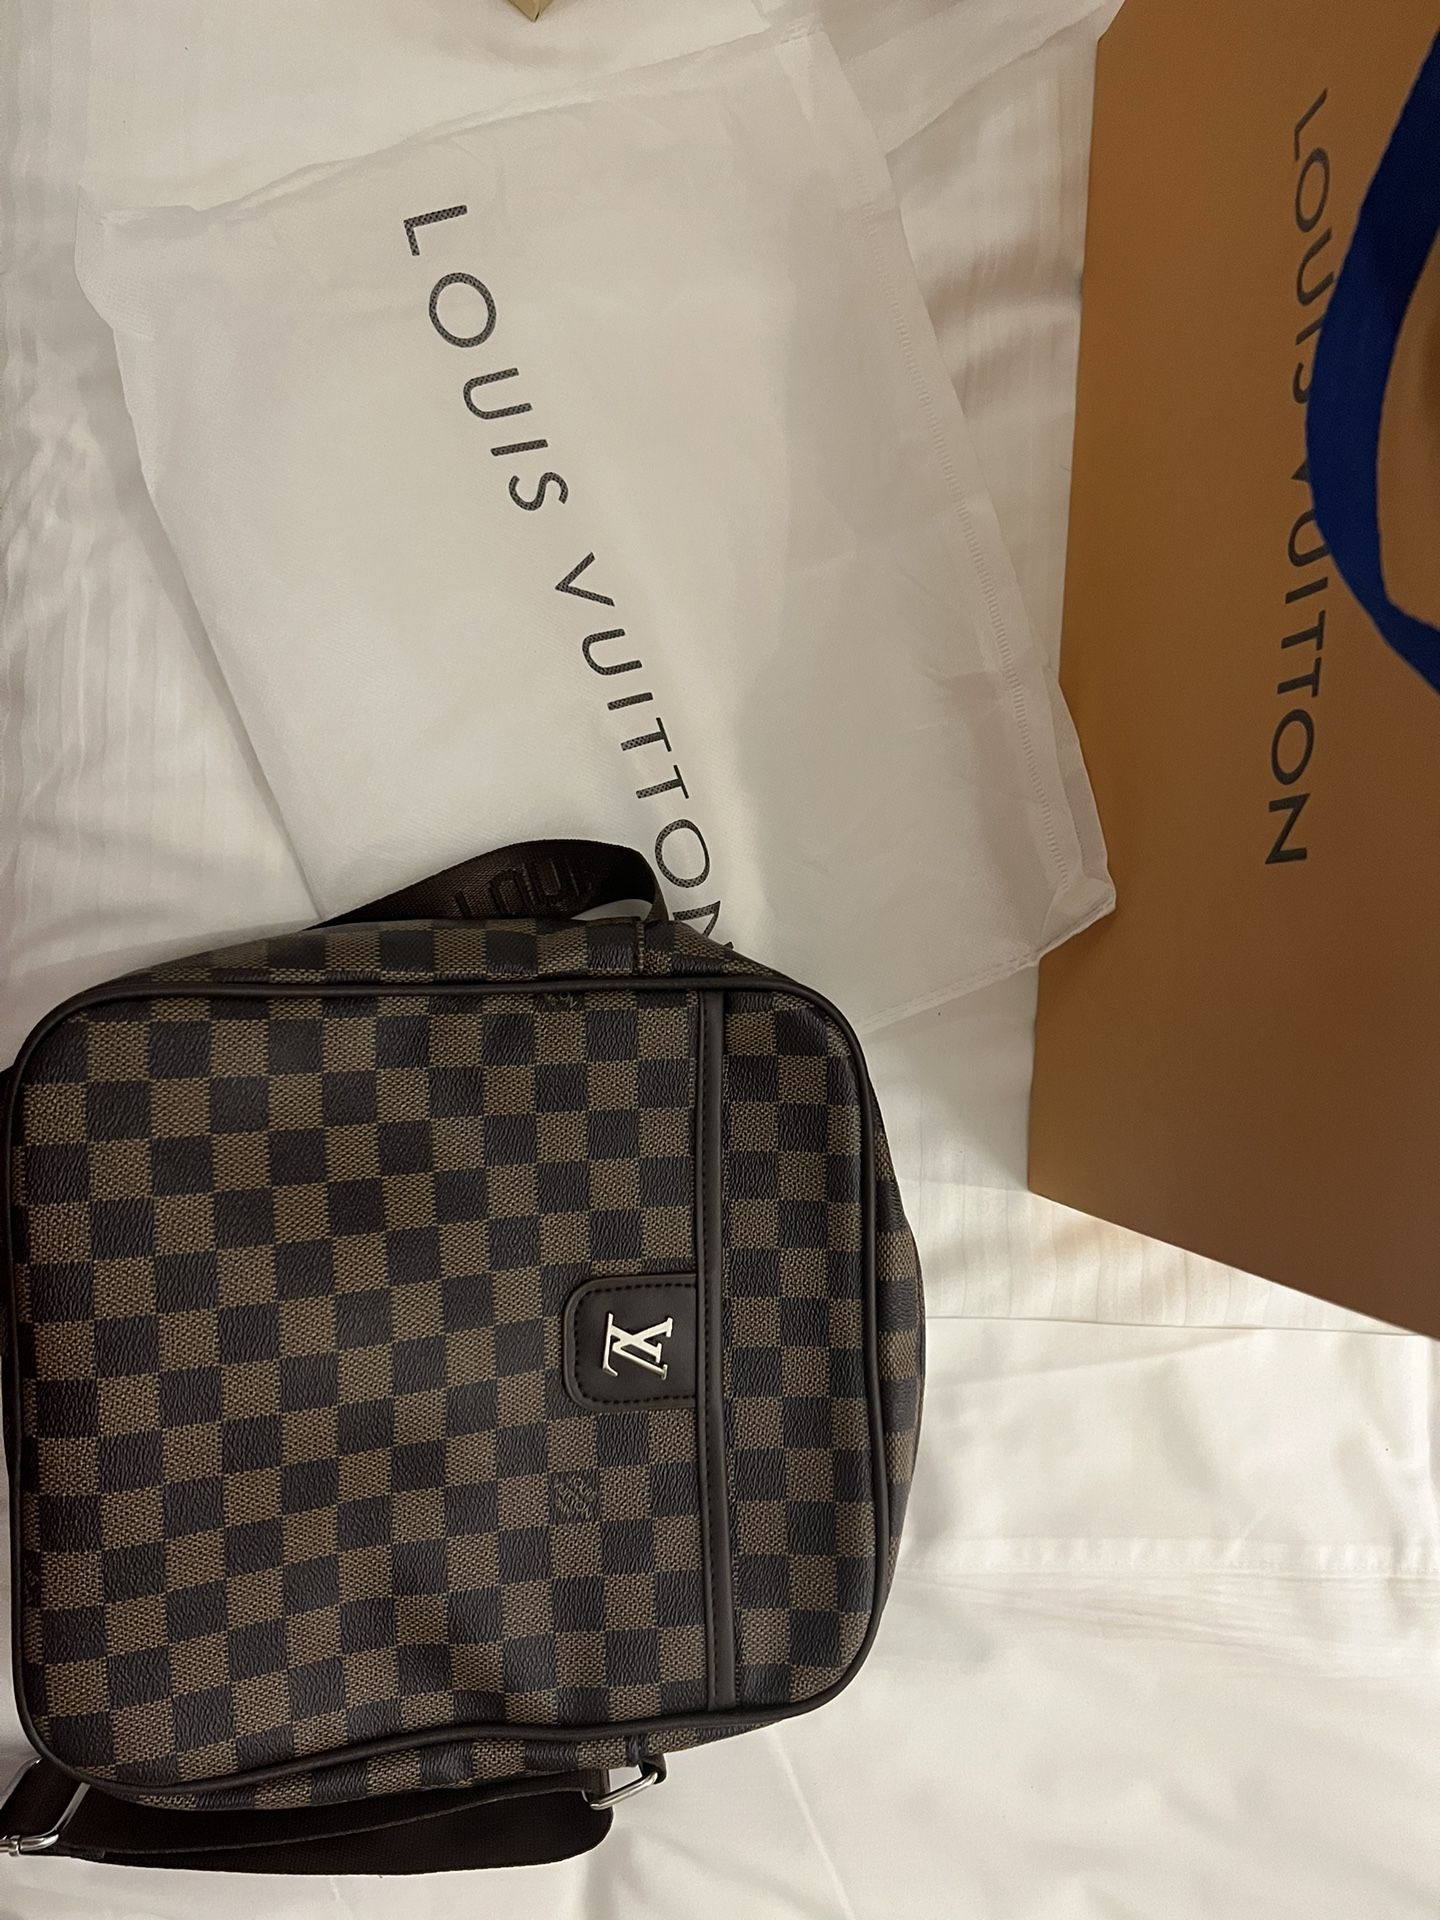 LV Messenger Bag for Sale in Prospect Heights, IL - OfferUp